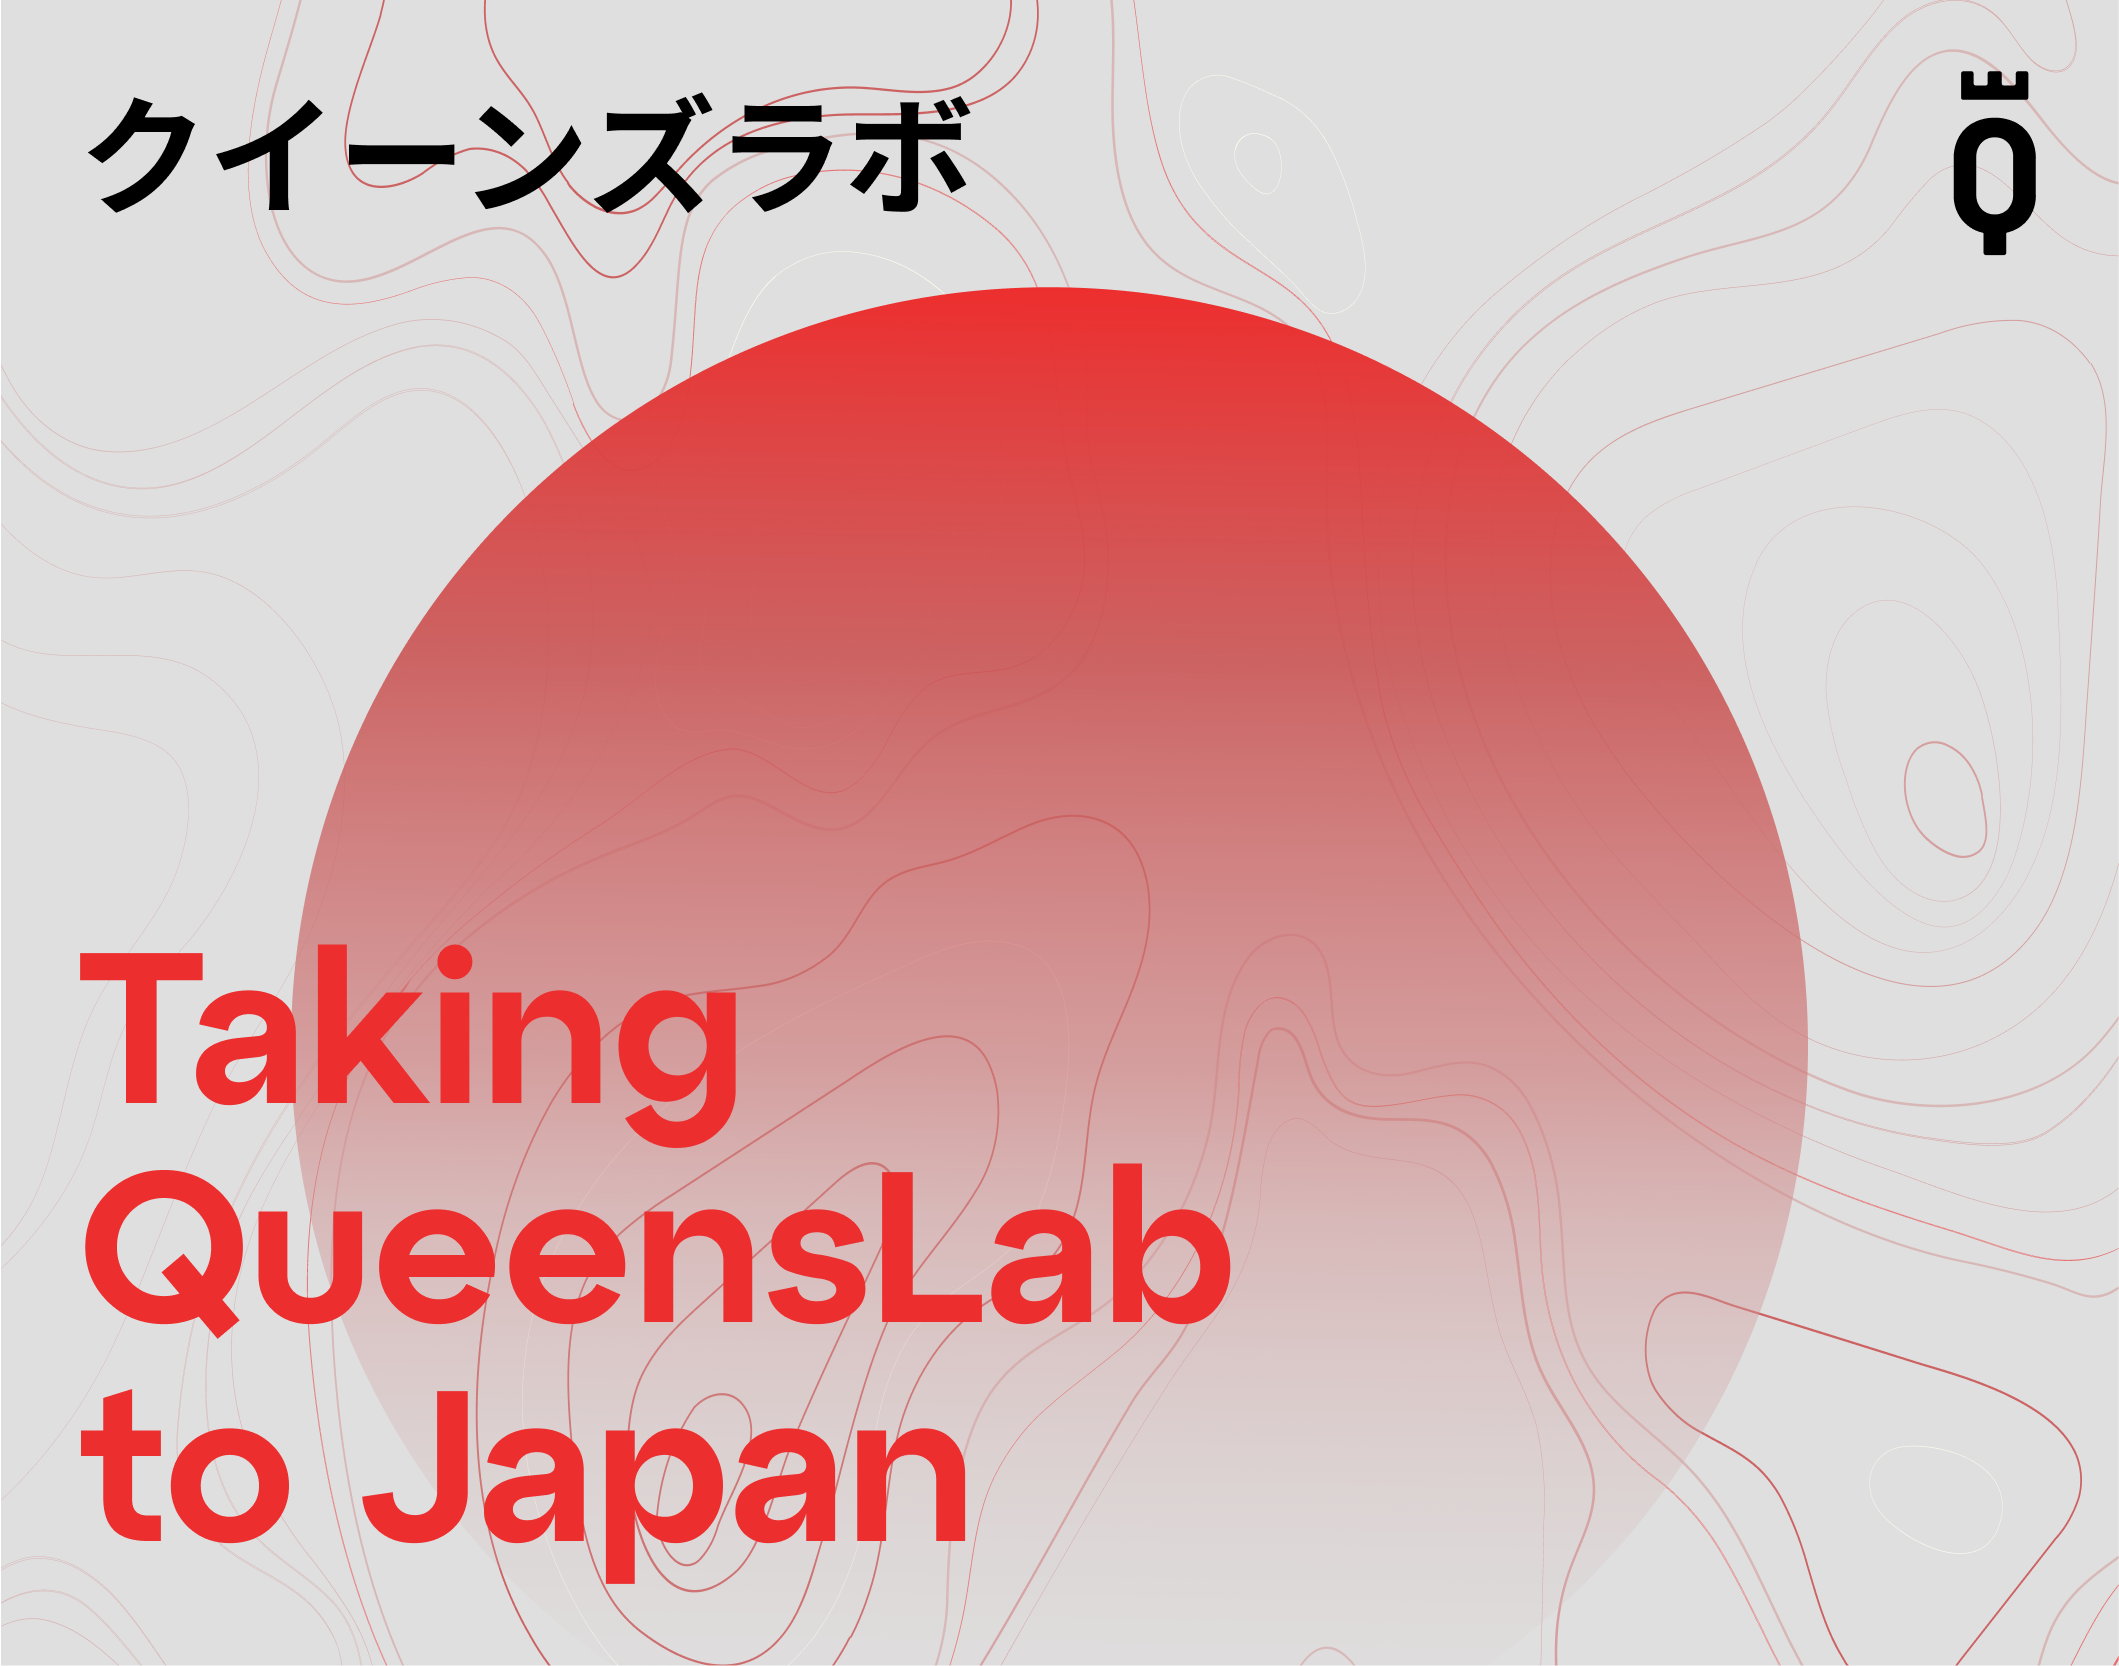 Taking_queenslab_to_japan_red_sun